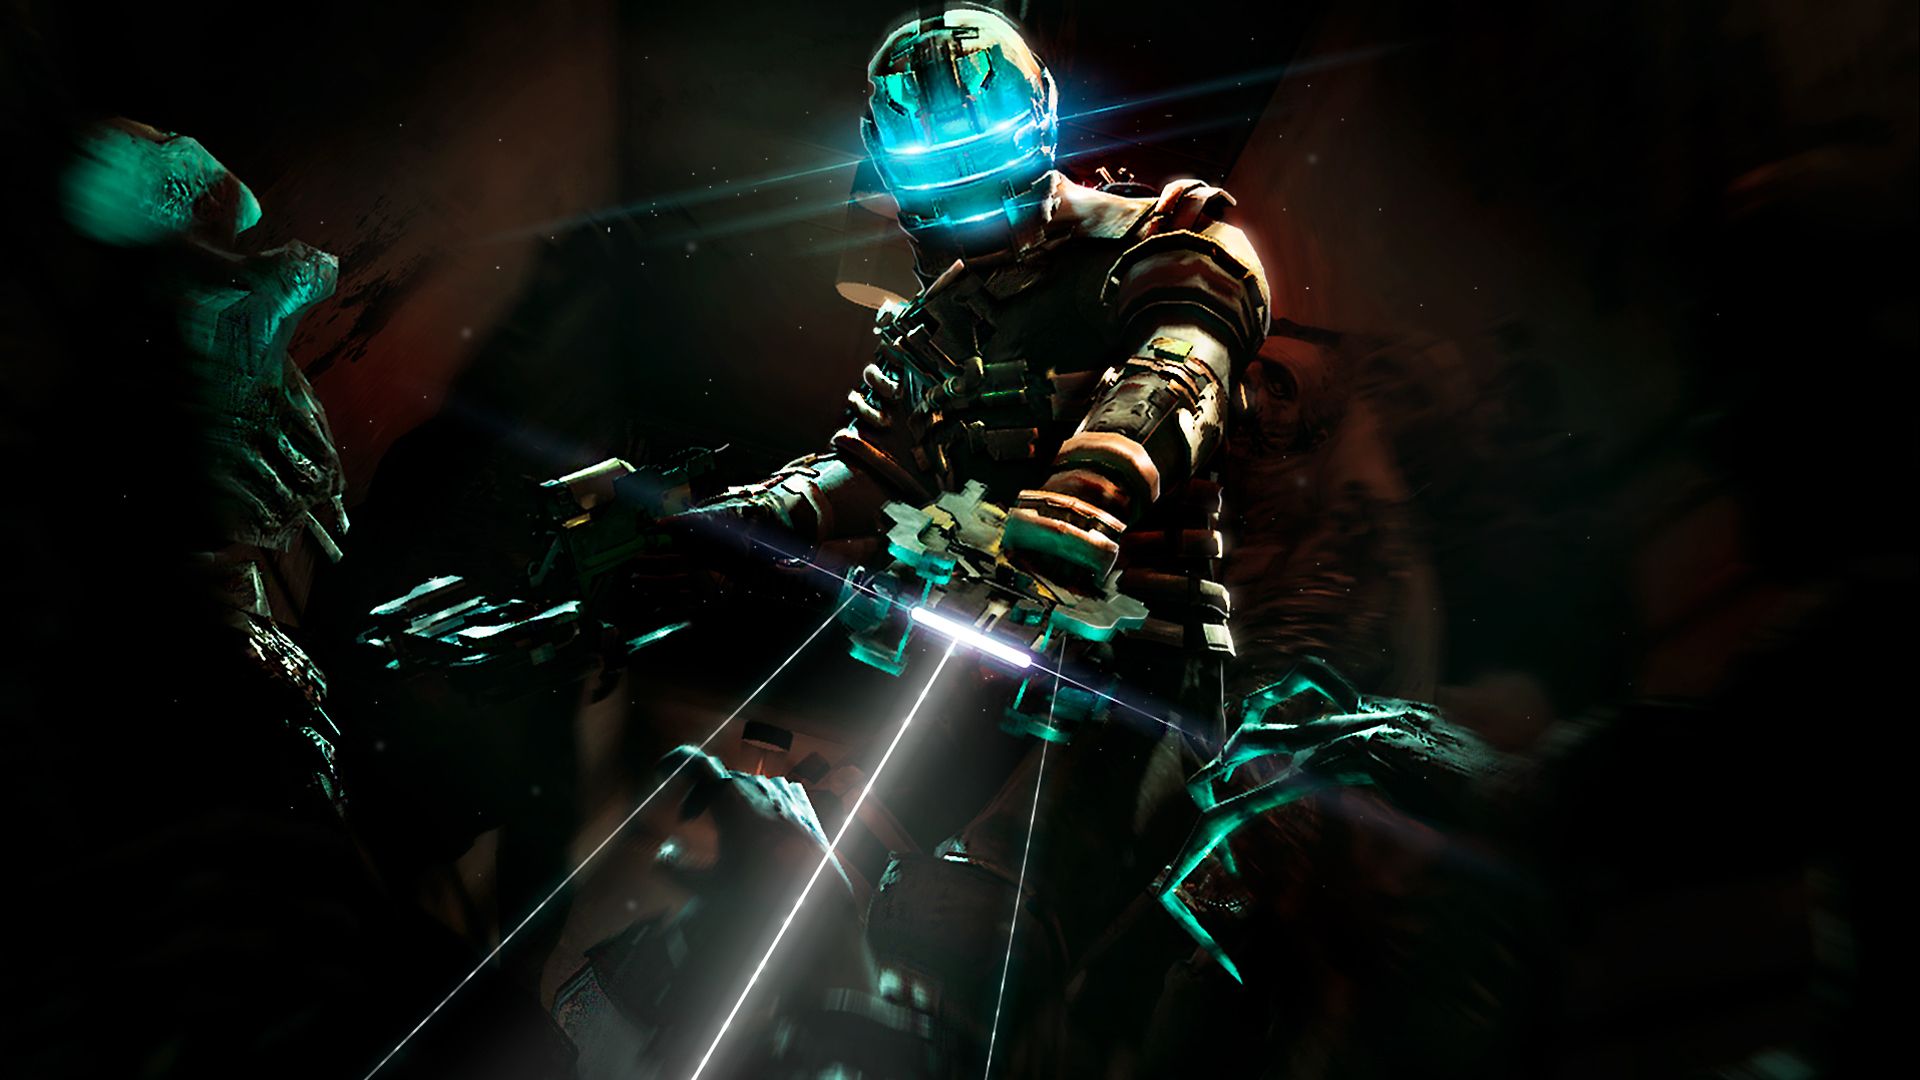 Dead Space Wallpapers 1920x1080 px, # 9B1H7F6 - 4USkY